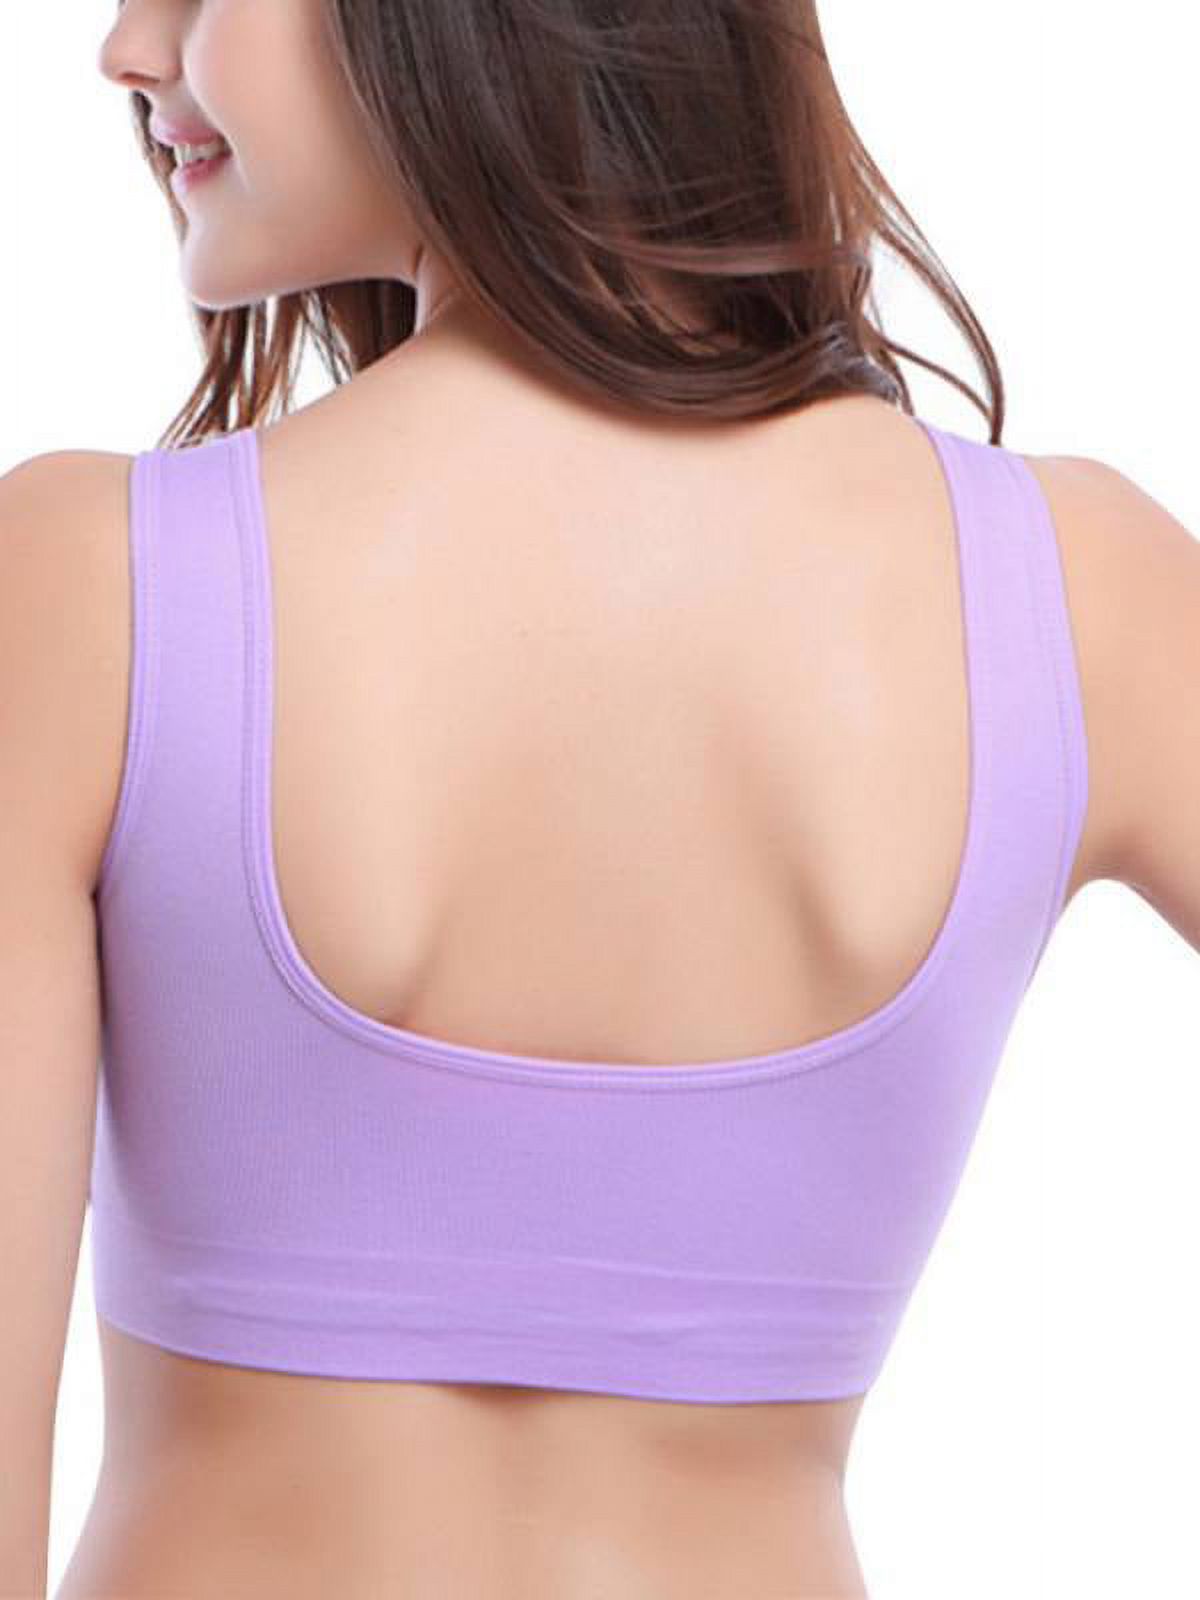 Babula Women Seamless Lace Padded Solid Color Sport Bras - image 2 of 2